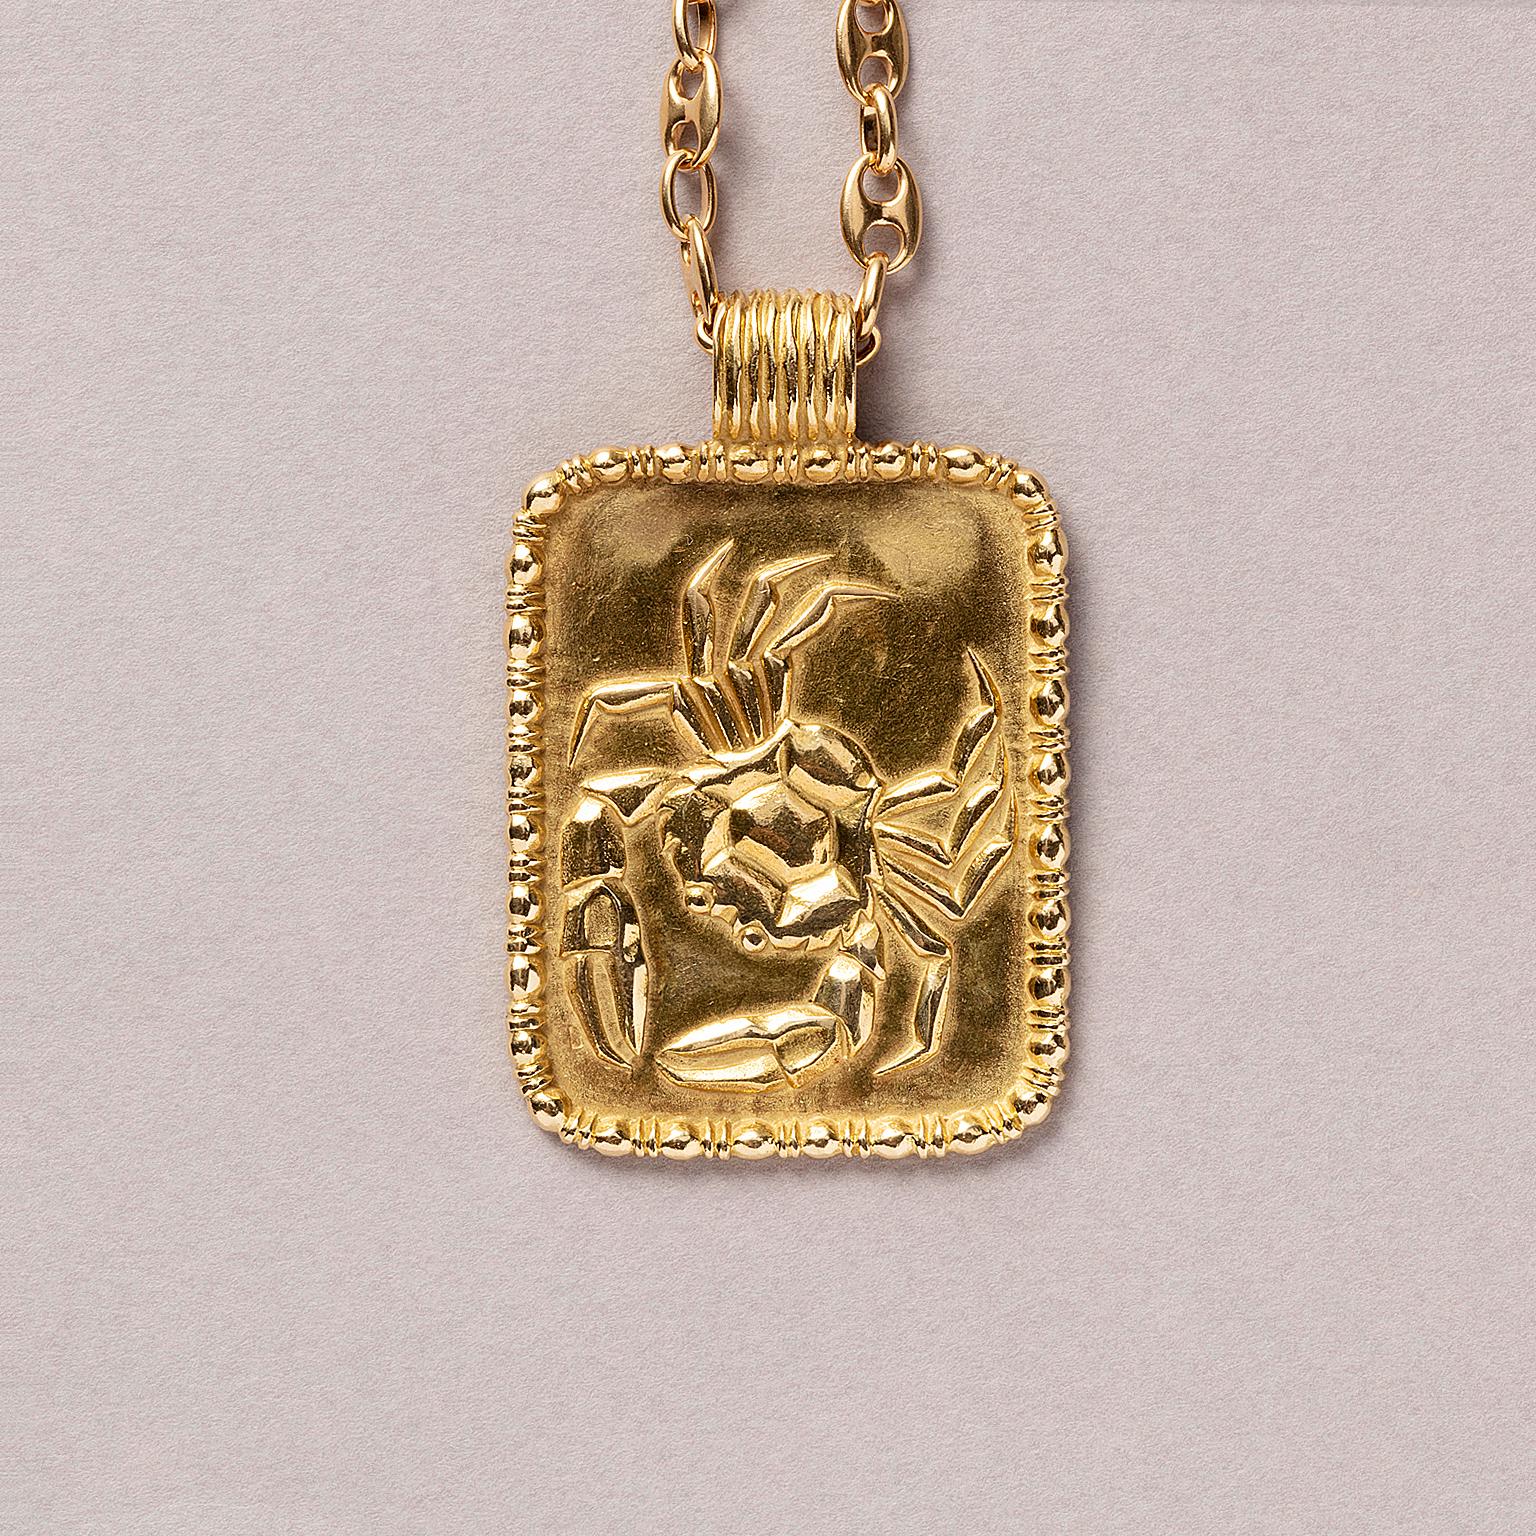 An 18 careat yellow gold cancer zodiac pendant. The outlining of the pendant is decorated with small balls and bars and the bails is also decorated with stripes, signed FRED Paris.

weight: 27.3 grams
dimensions: 4.5 x 3.5 cm

the chain which is